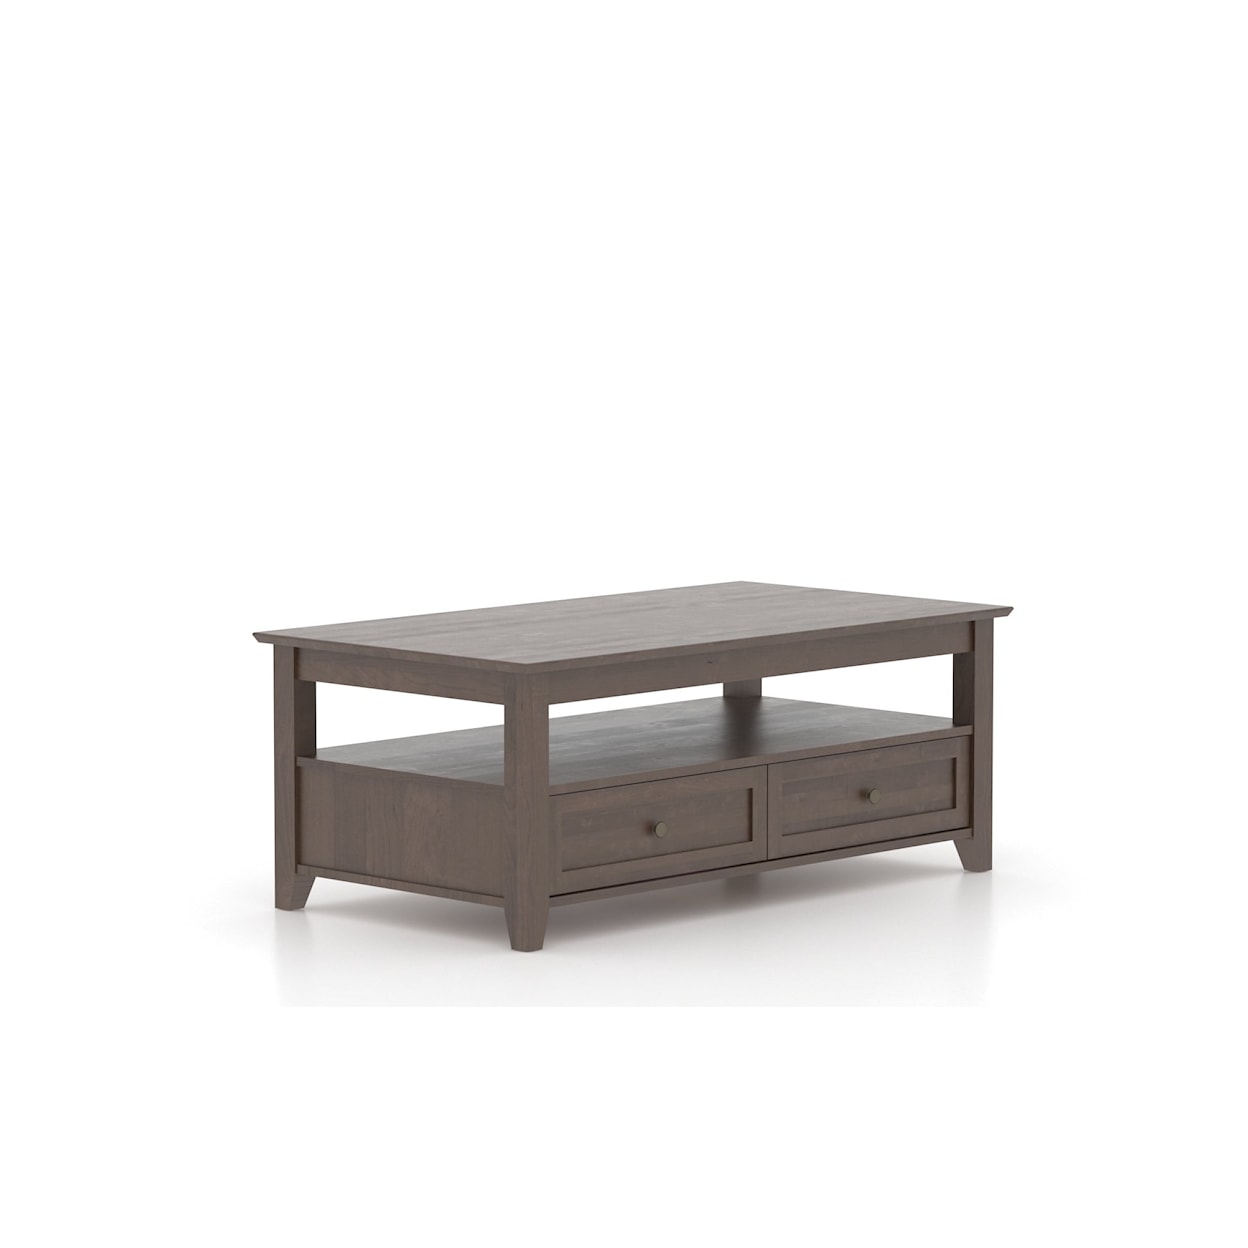 Canadel Accent Infinite Rectangular Coffee Table